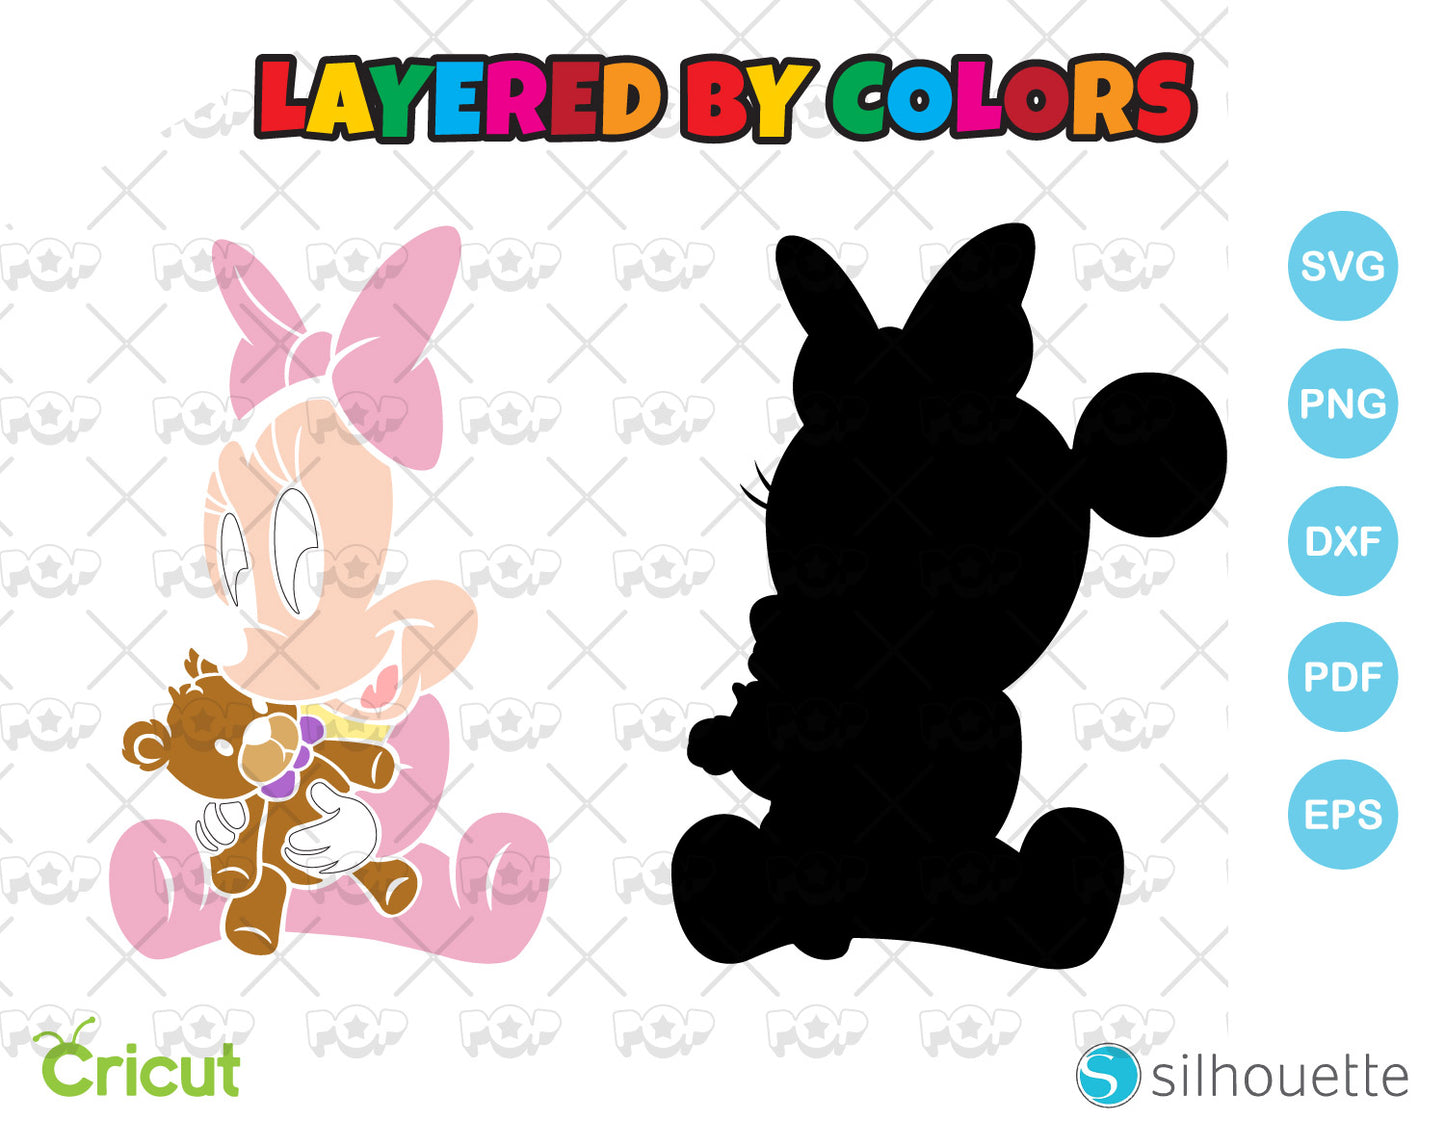 FREE Minnie clipart, Free Disney SVG cut file for cricut silhouette, SVG, PNG, DXF, instant download